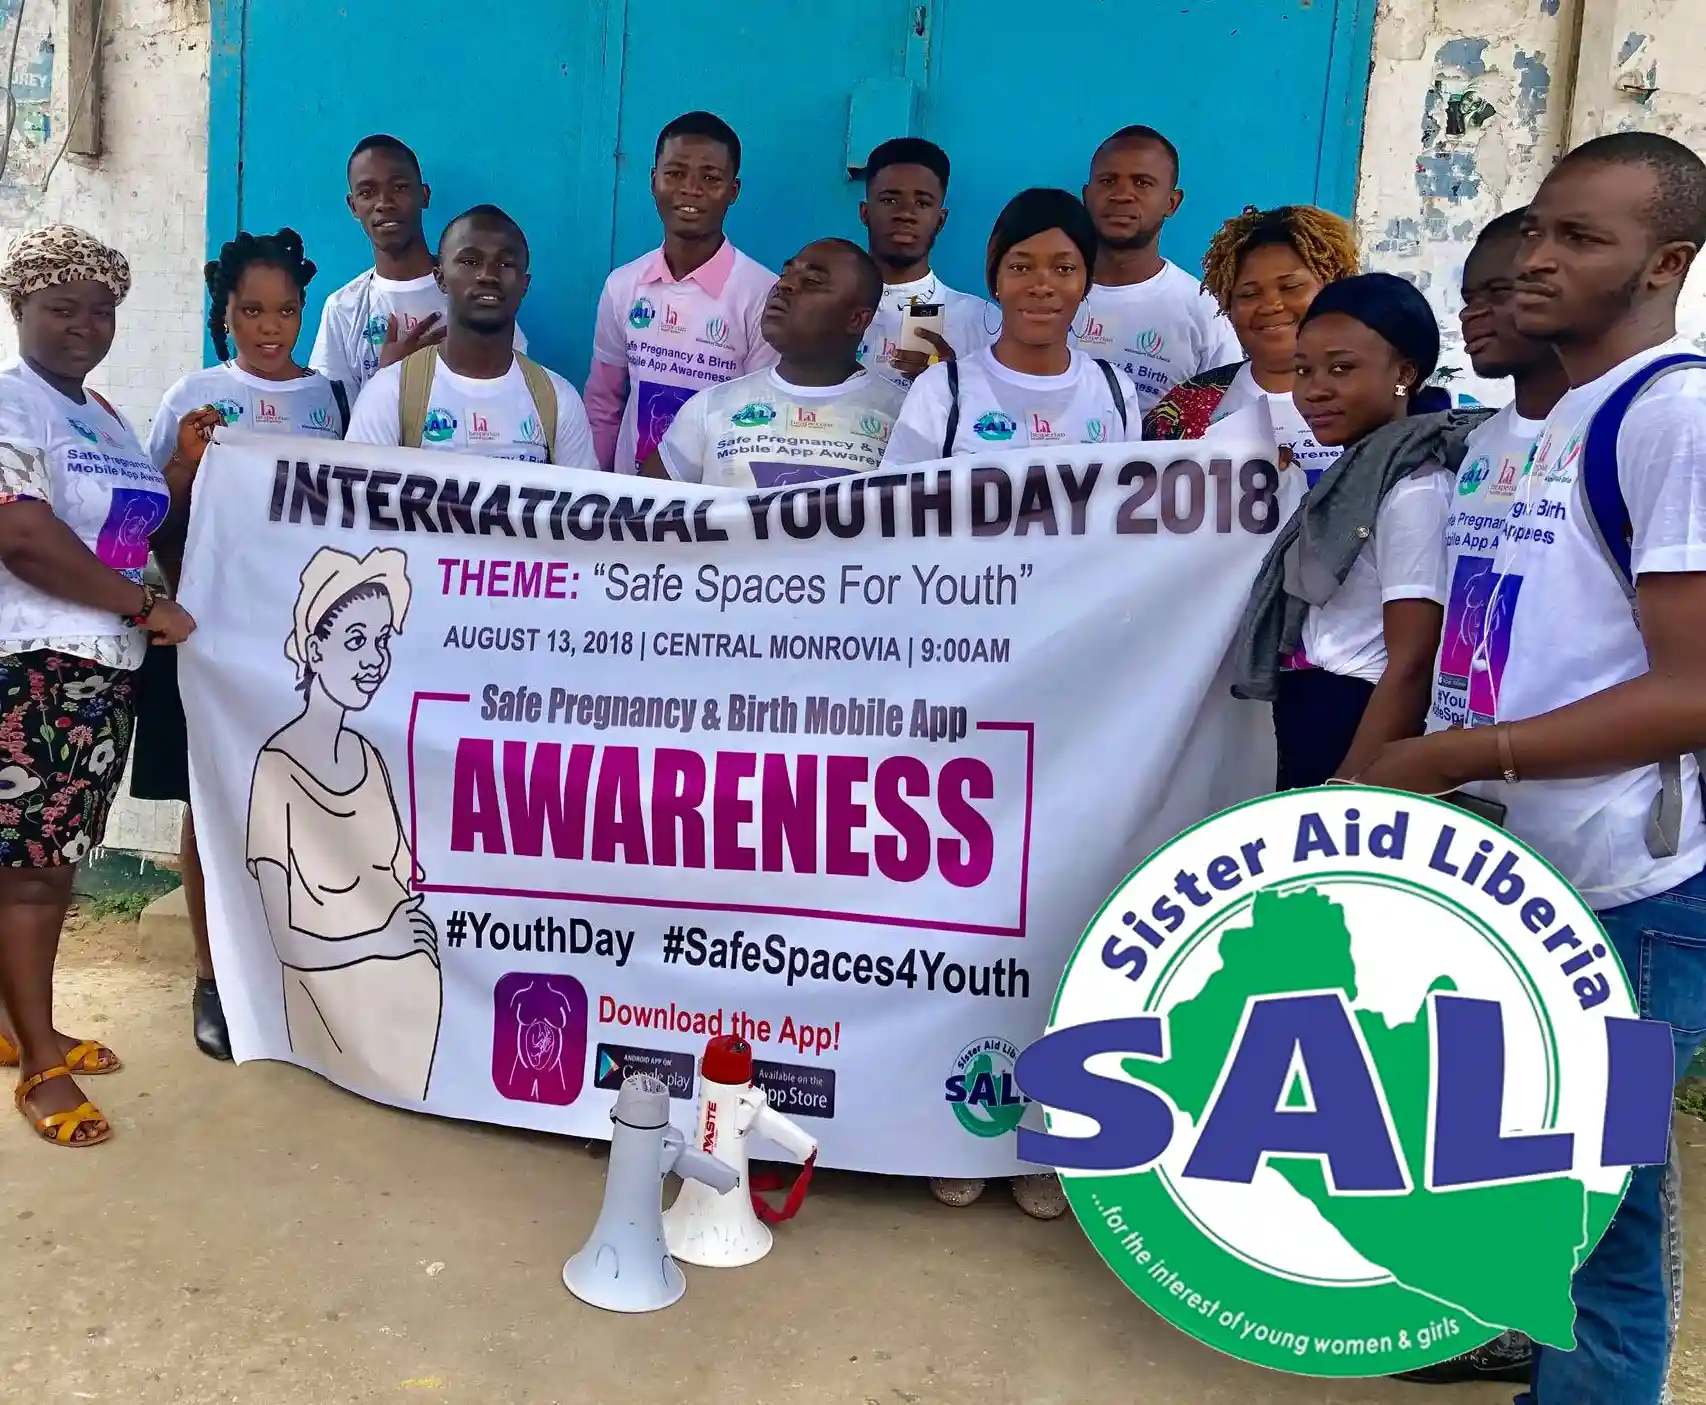 A group of people in Africa wear matching t-shirts and hold a banner supporting International Youth Day 2018.